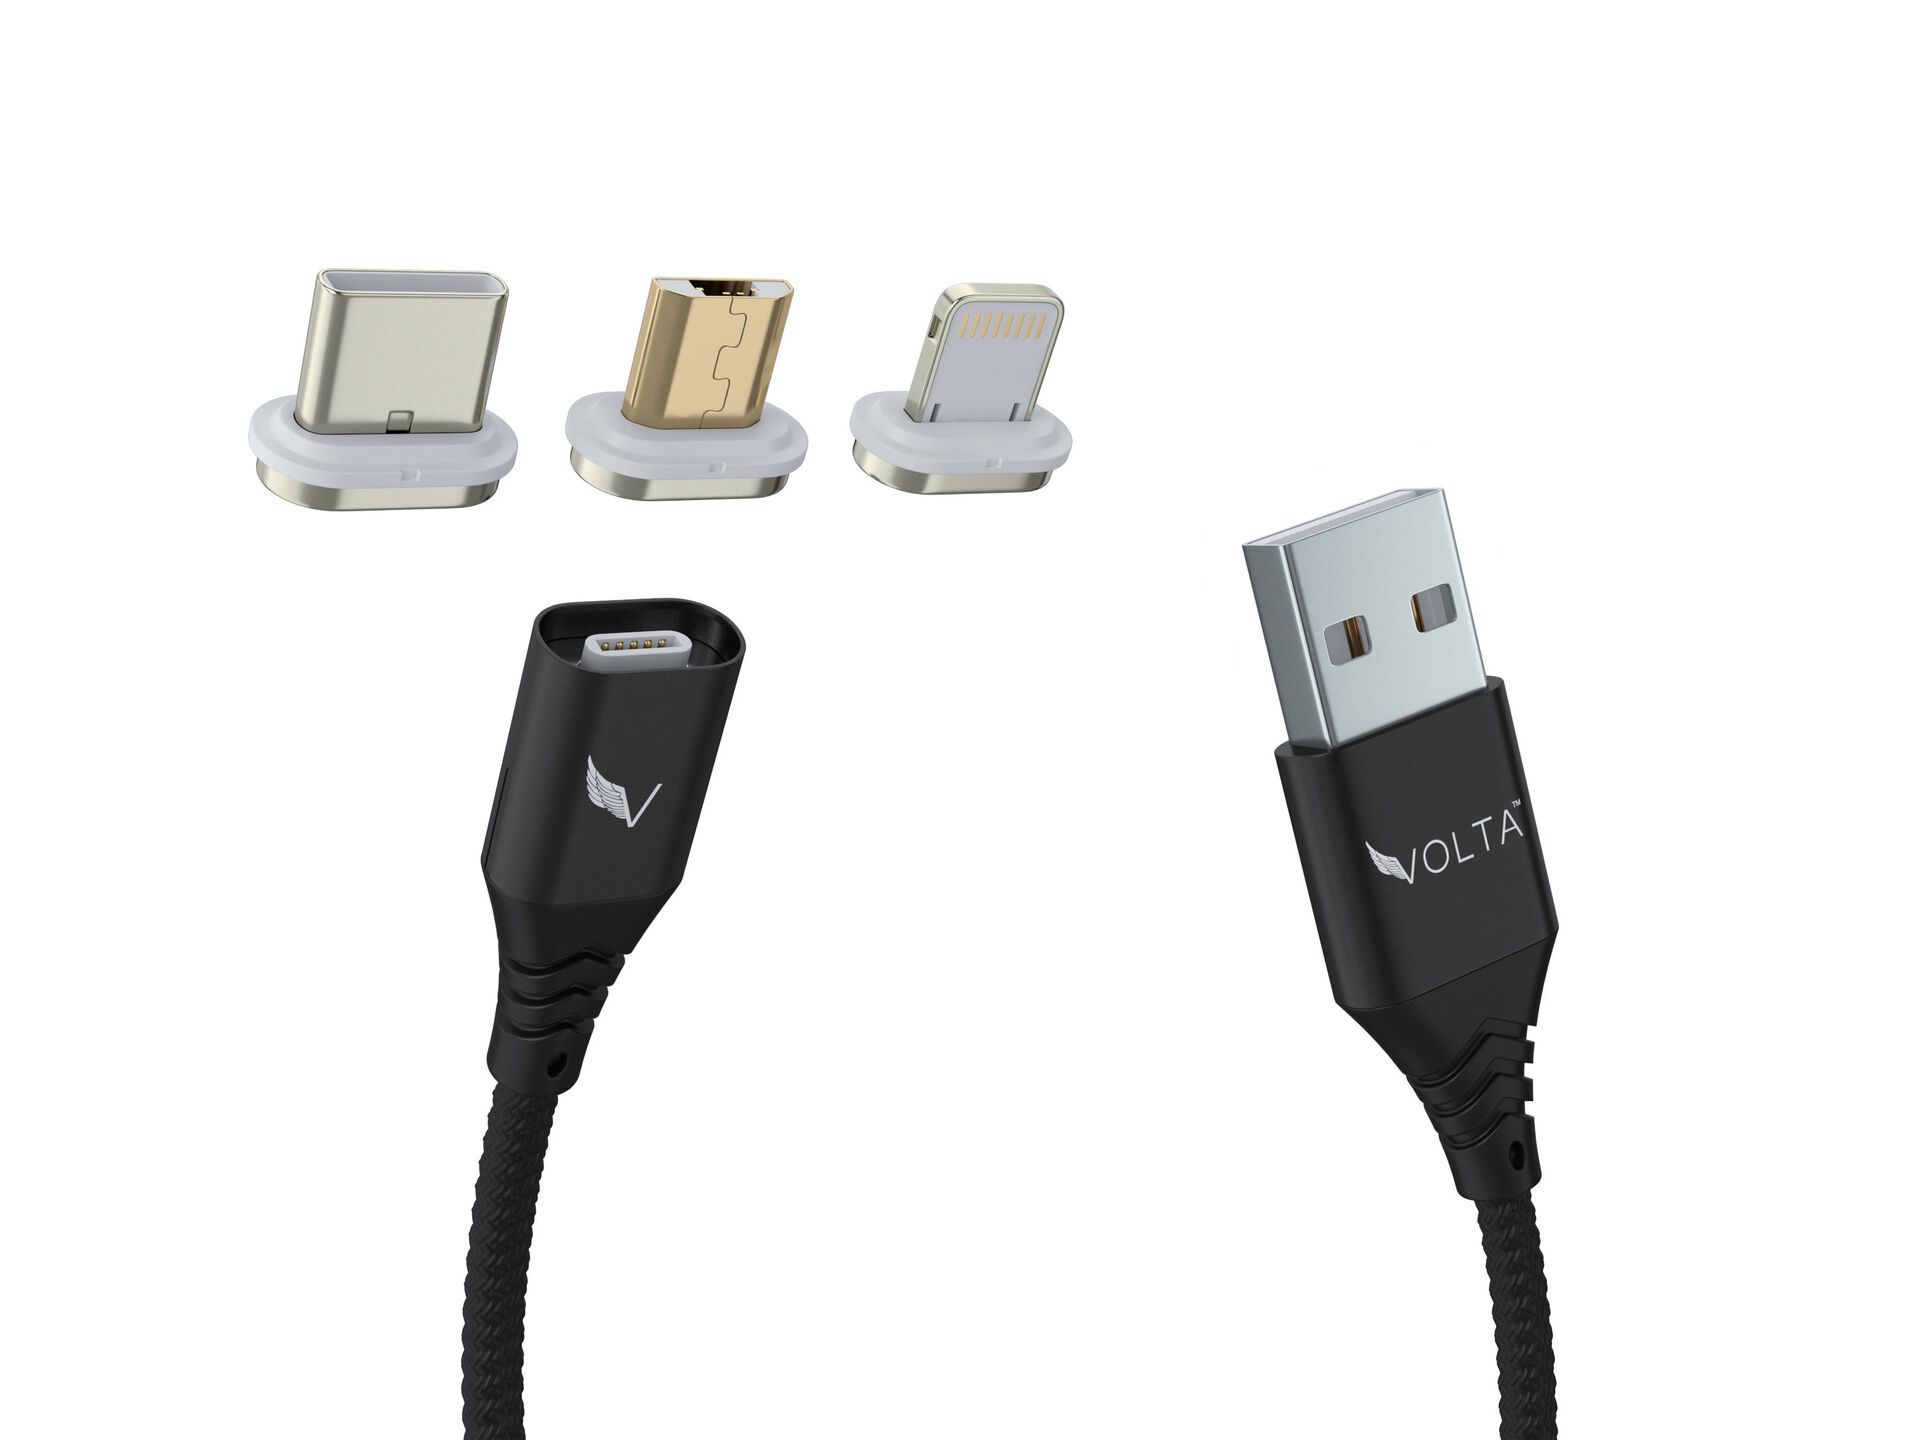 Volta charging cable 2.0 - magentic tips